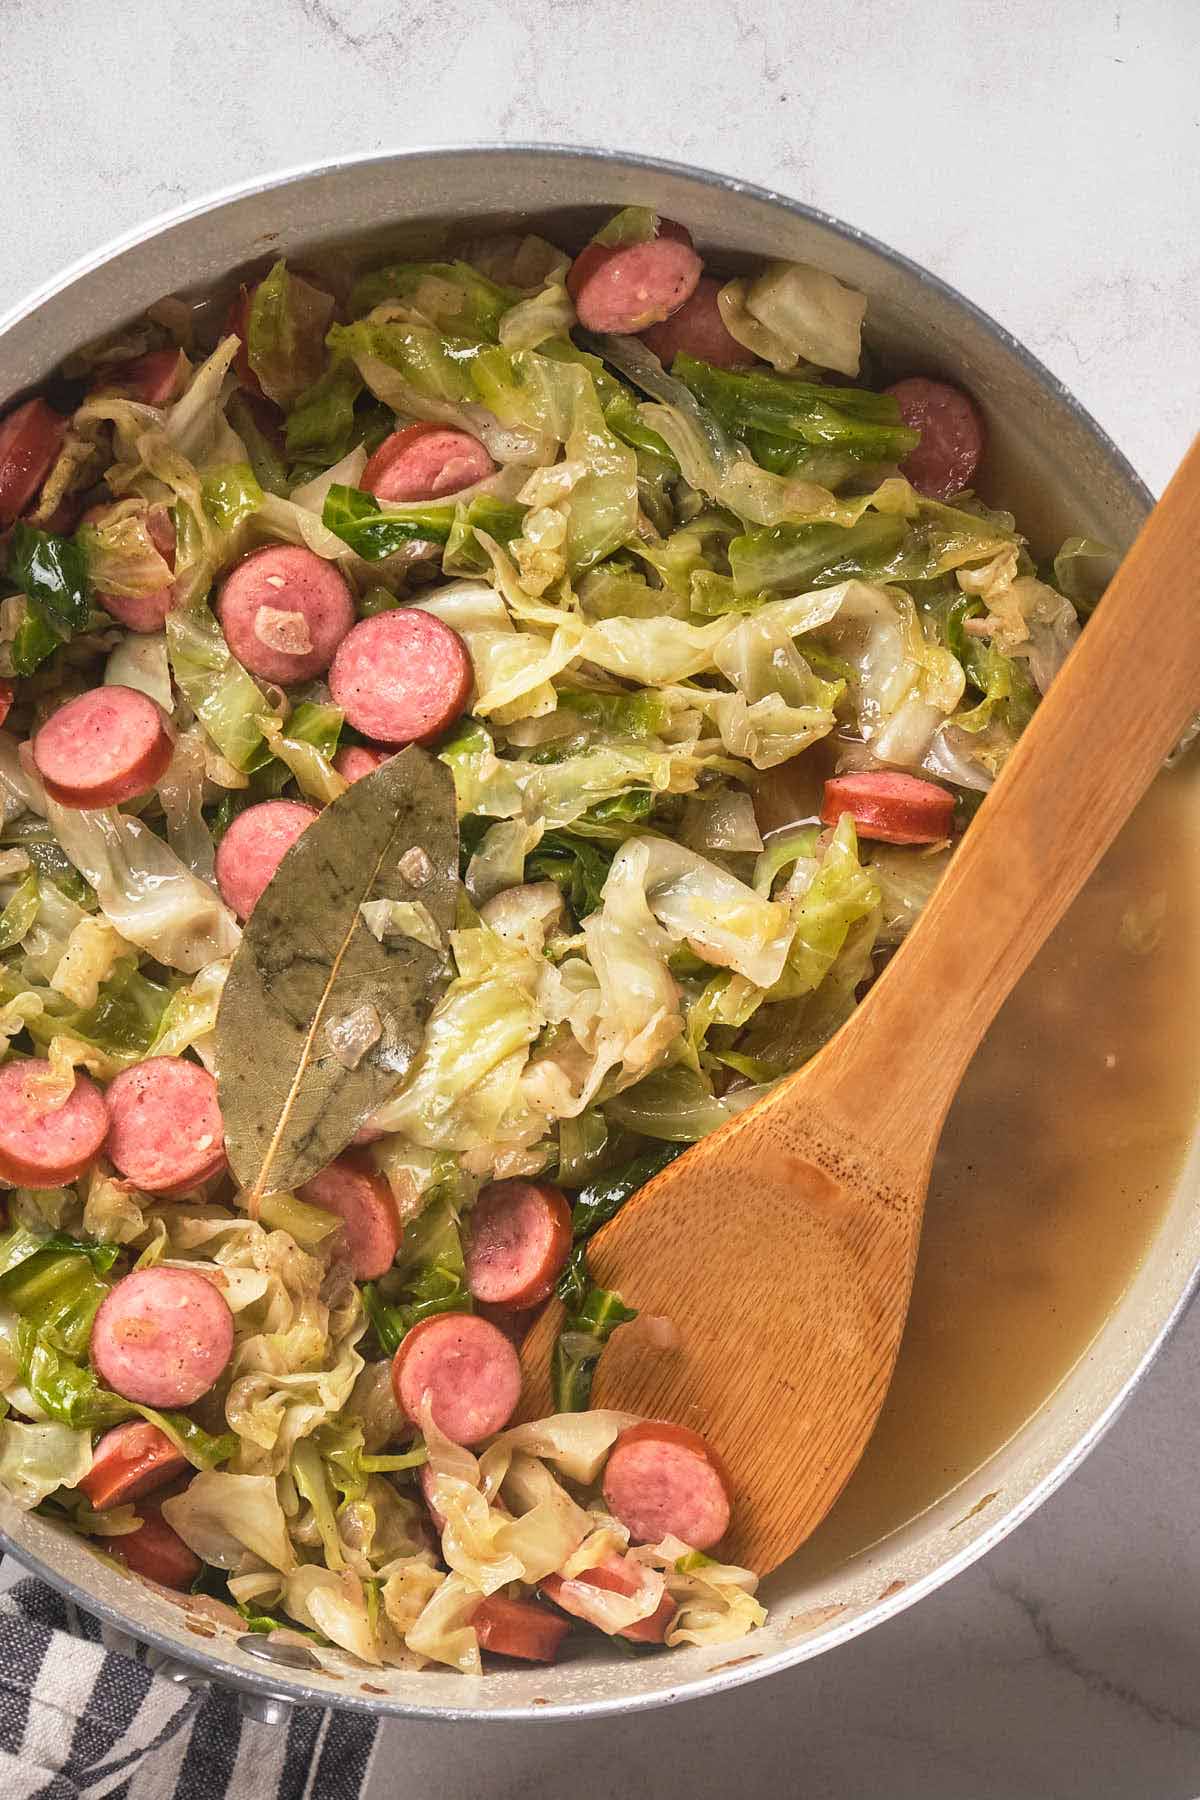 A pot filled with cooked cabbage, sliced sausages, and broth, garnished with a bay leaf.